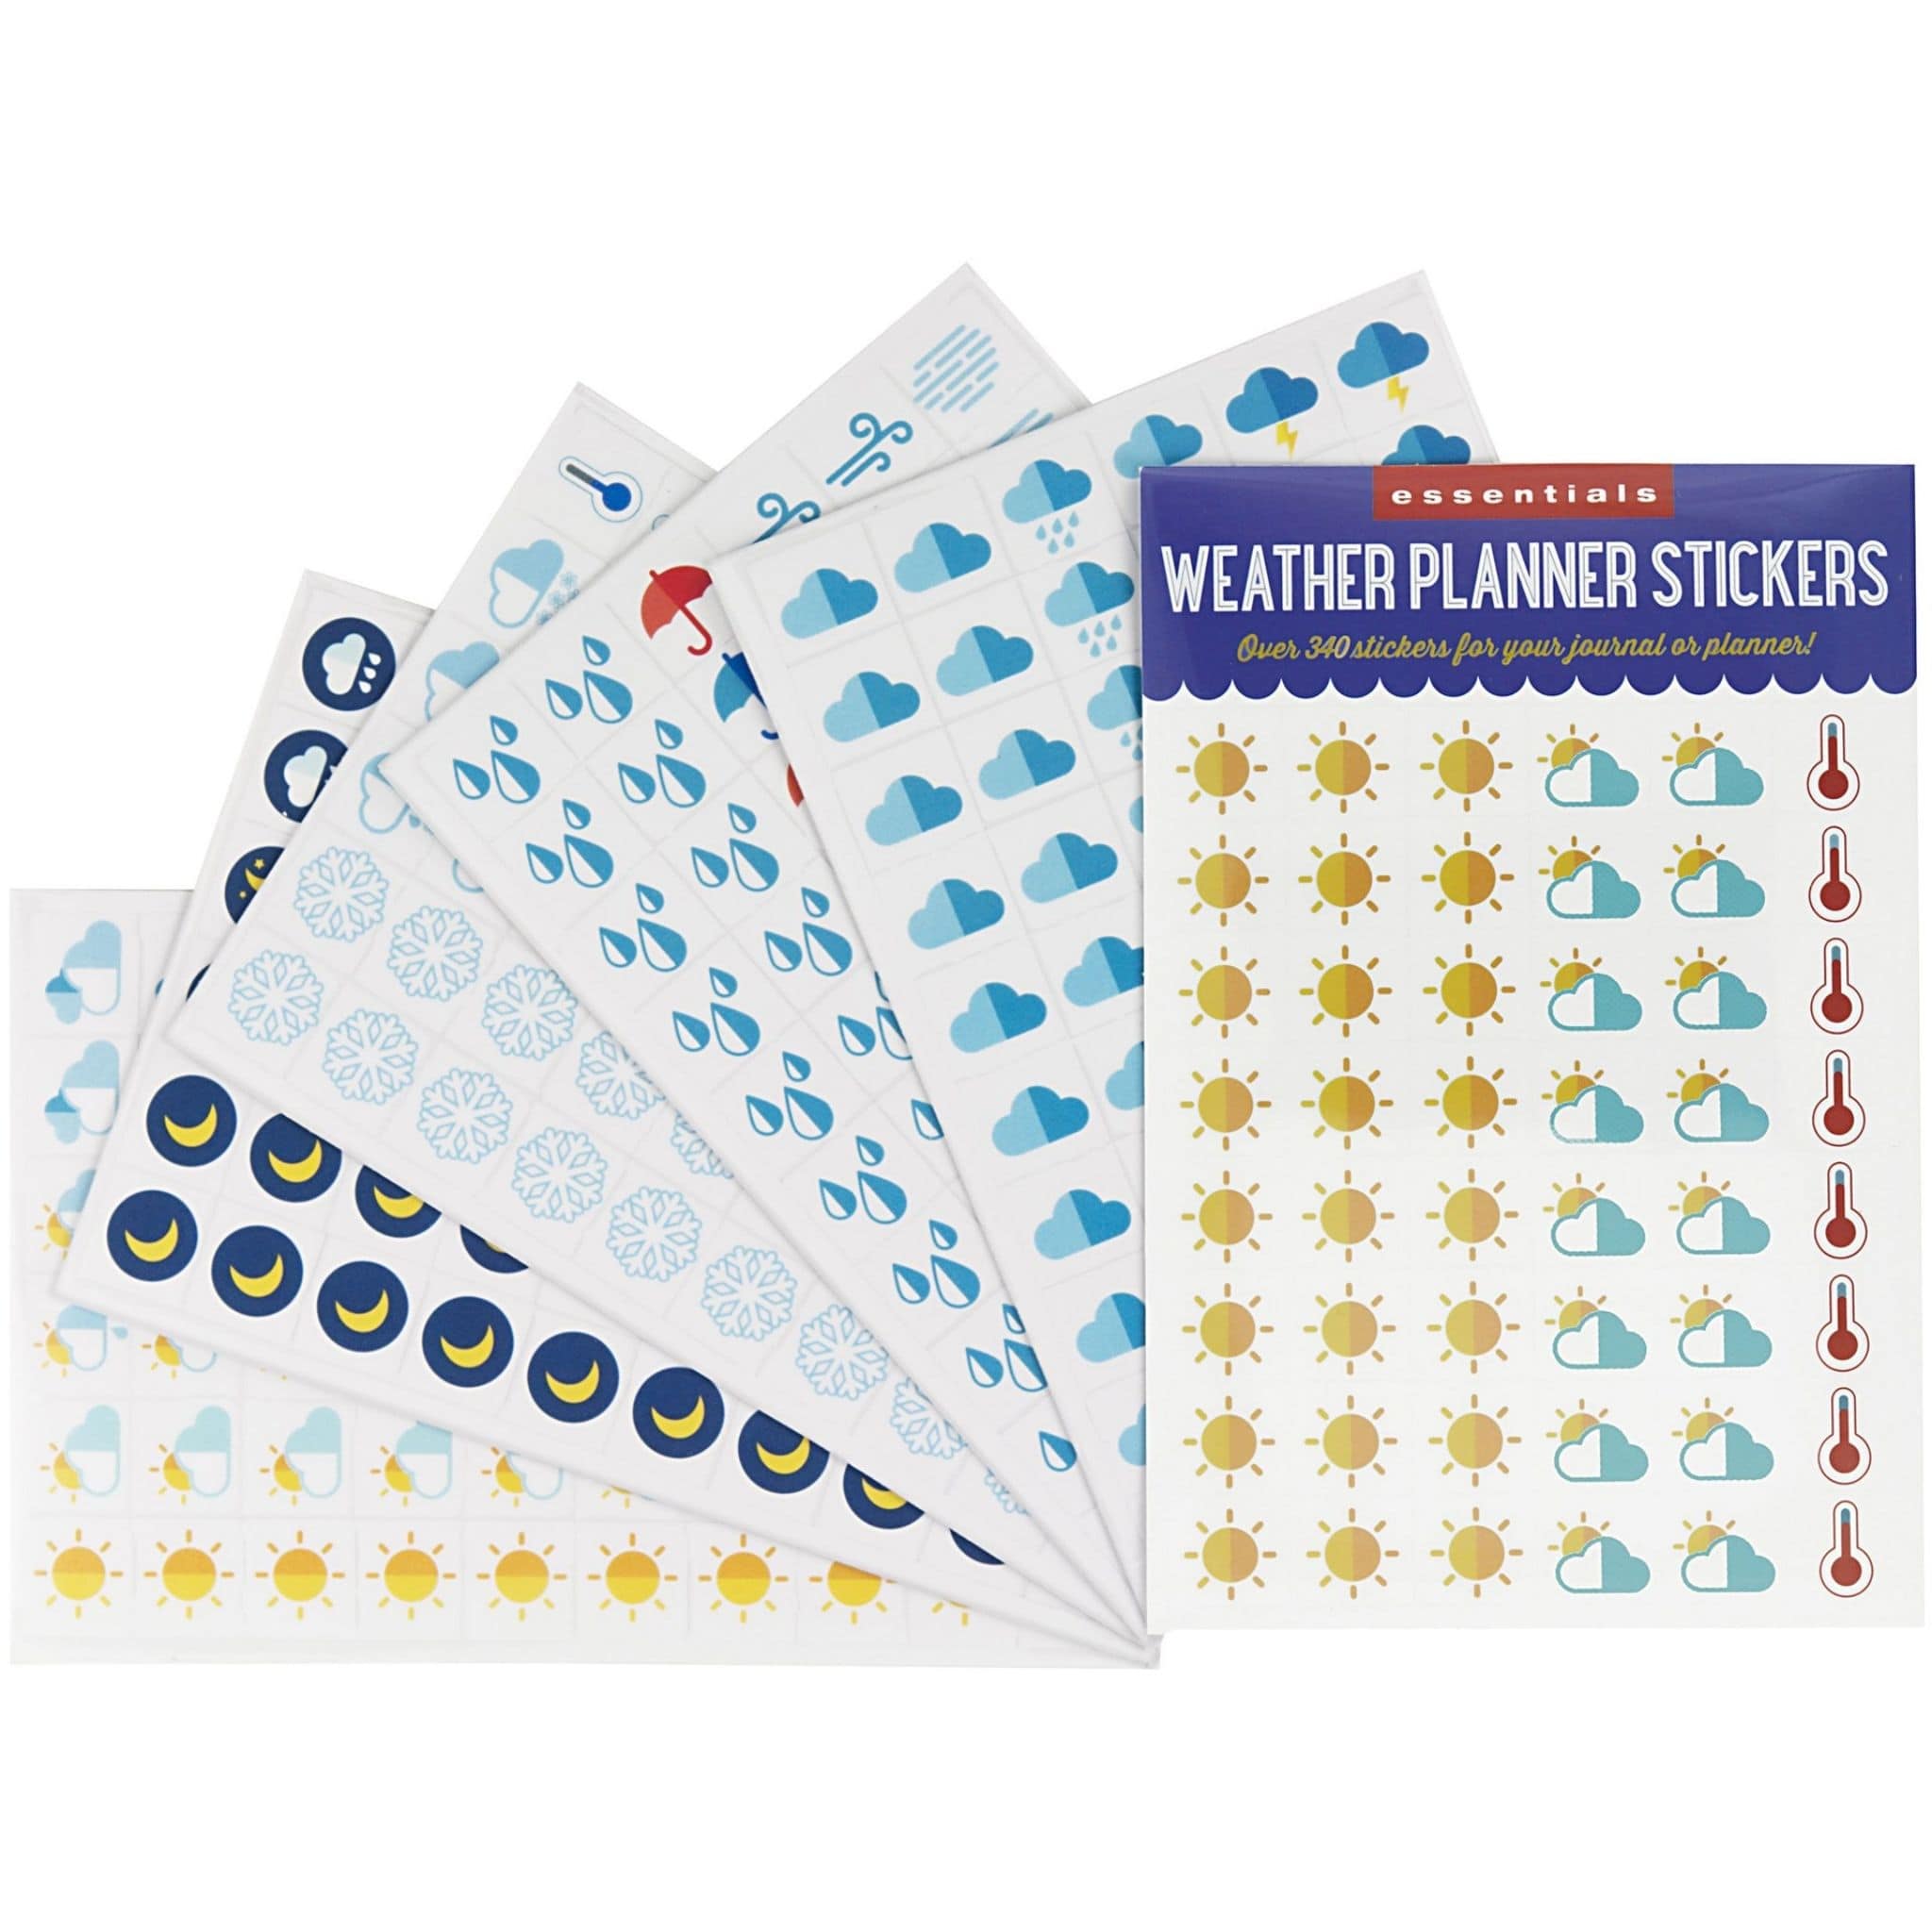 essentials weather planner stickers whole set with 6 sheets - Paper Kooka